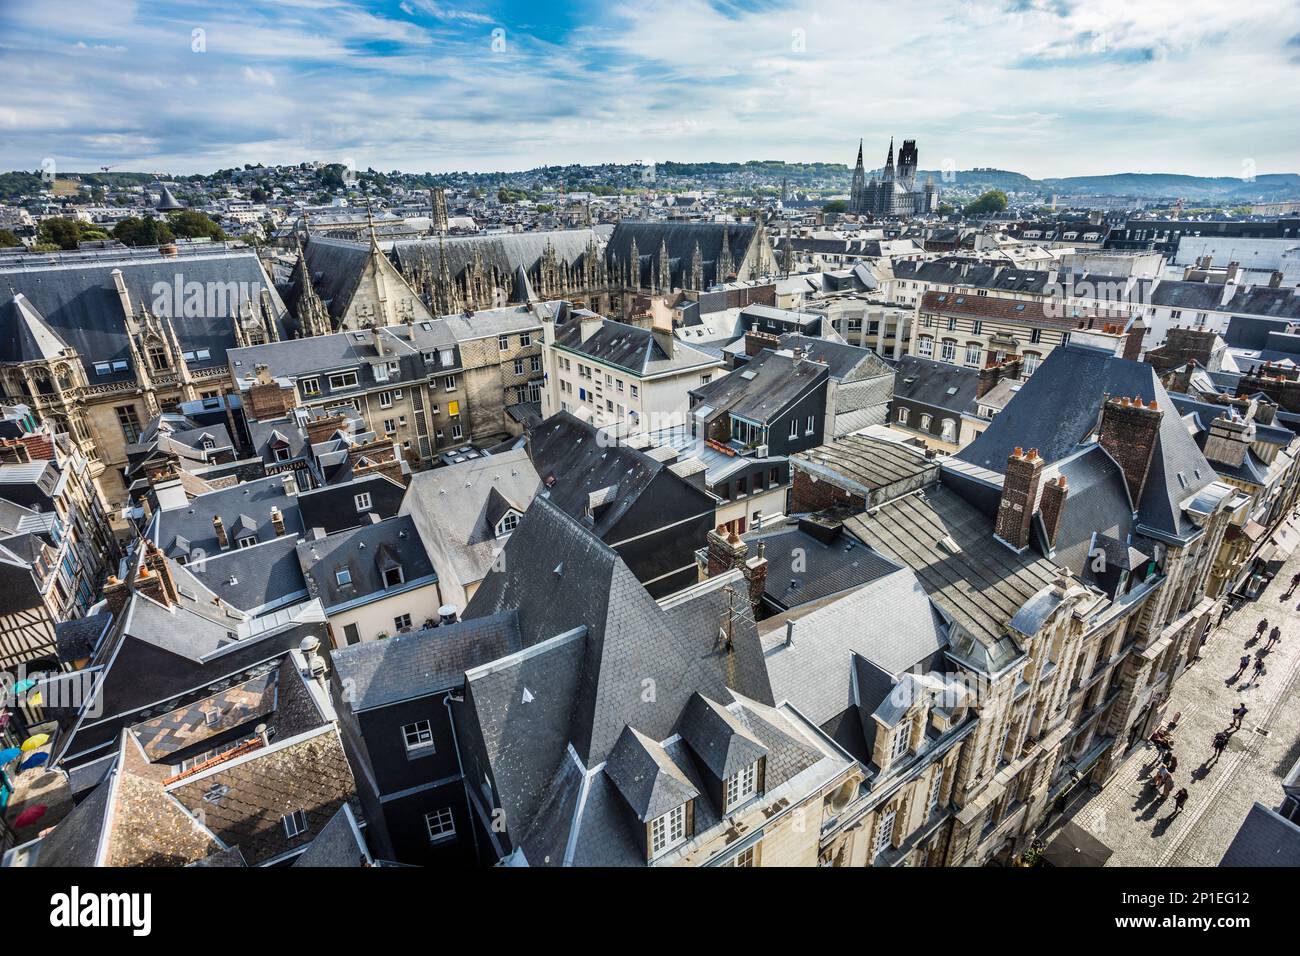 view over the roofs of Rouen from the belfry of the Gros Horloge, looking towards the Gothic architecture of the Palais de Justie, the Rouen Courthous Stock Photo